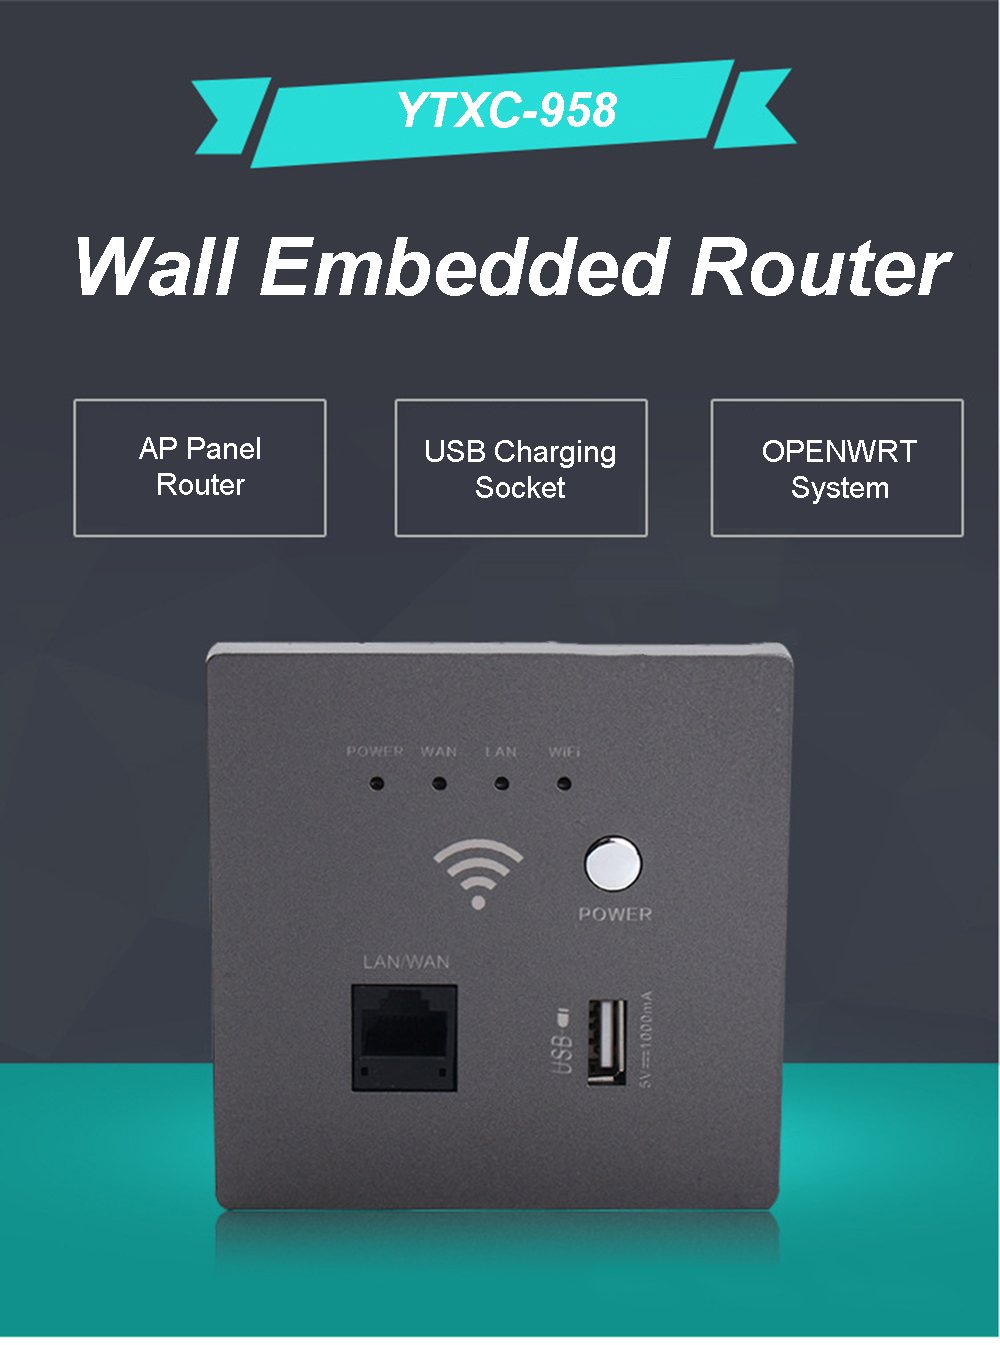 300Mbps Wall Embedded Router Wireless AP Panel Router OPENWRT System WiFi Repeater Extender USB Charging Socket for Home Use